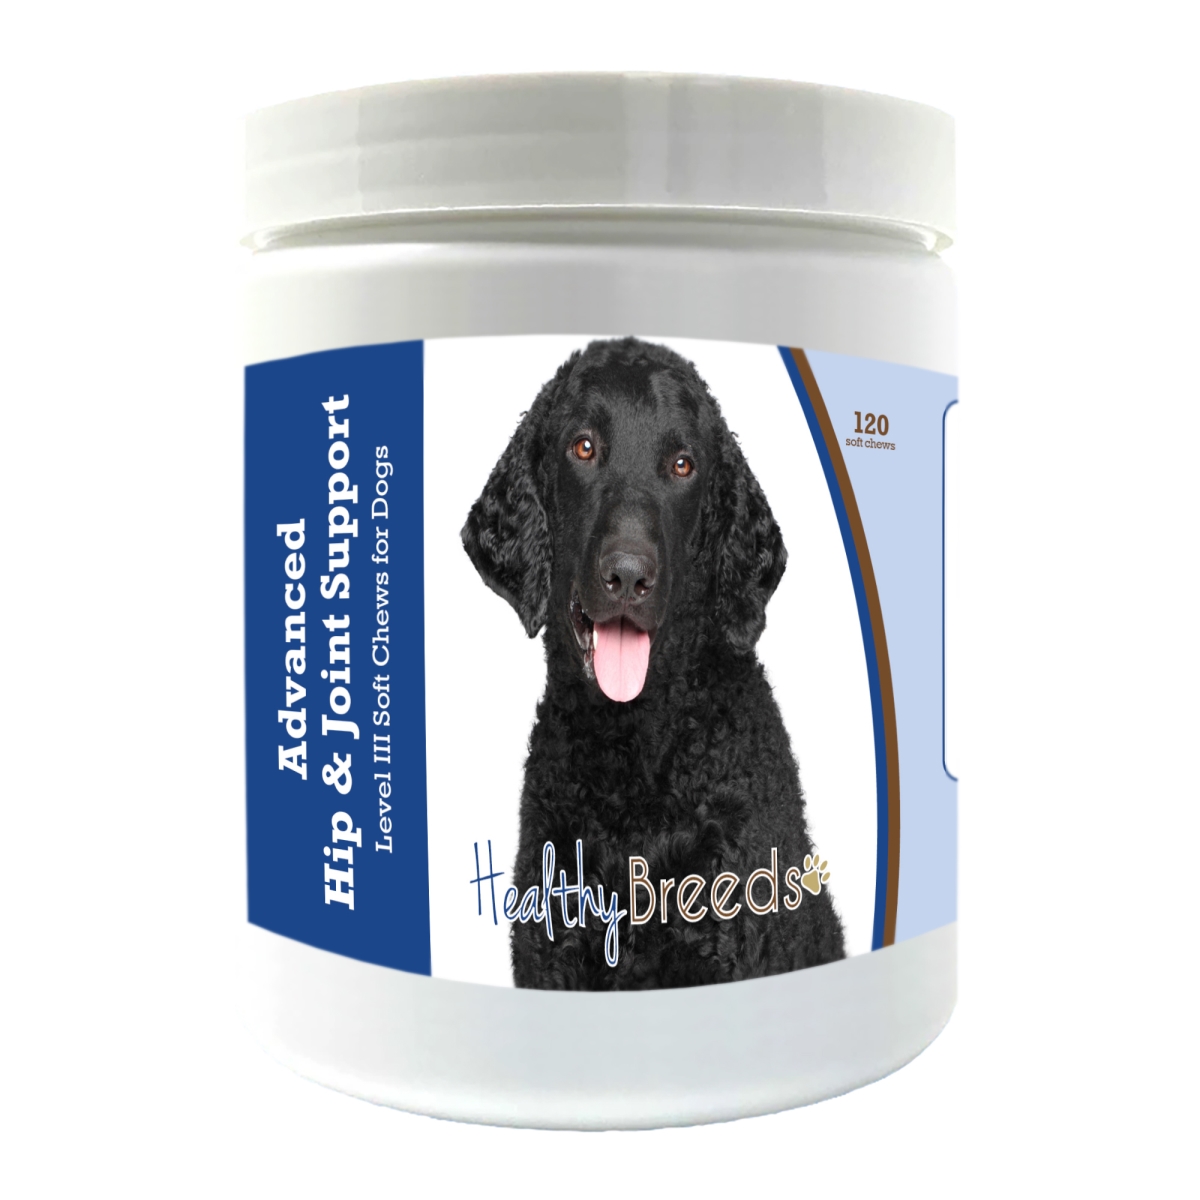 Picture of Healthy Breeds 192959898040 Curly-Coated Retriever Advanced Hip & Joint Support Level III Soft Chews for Dogs